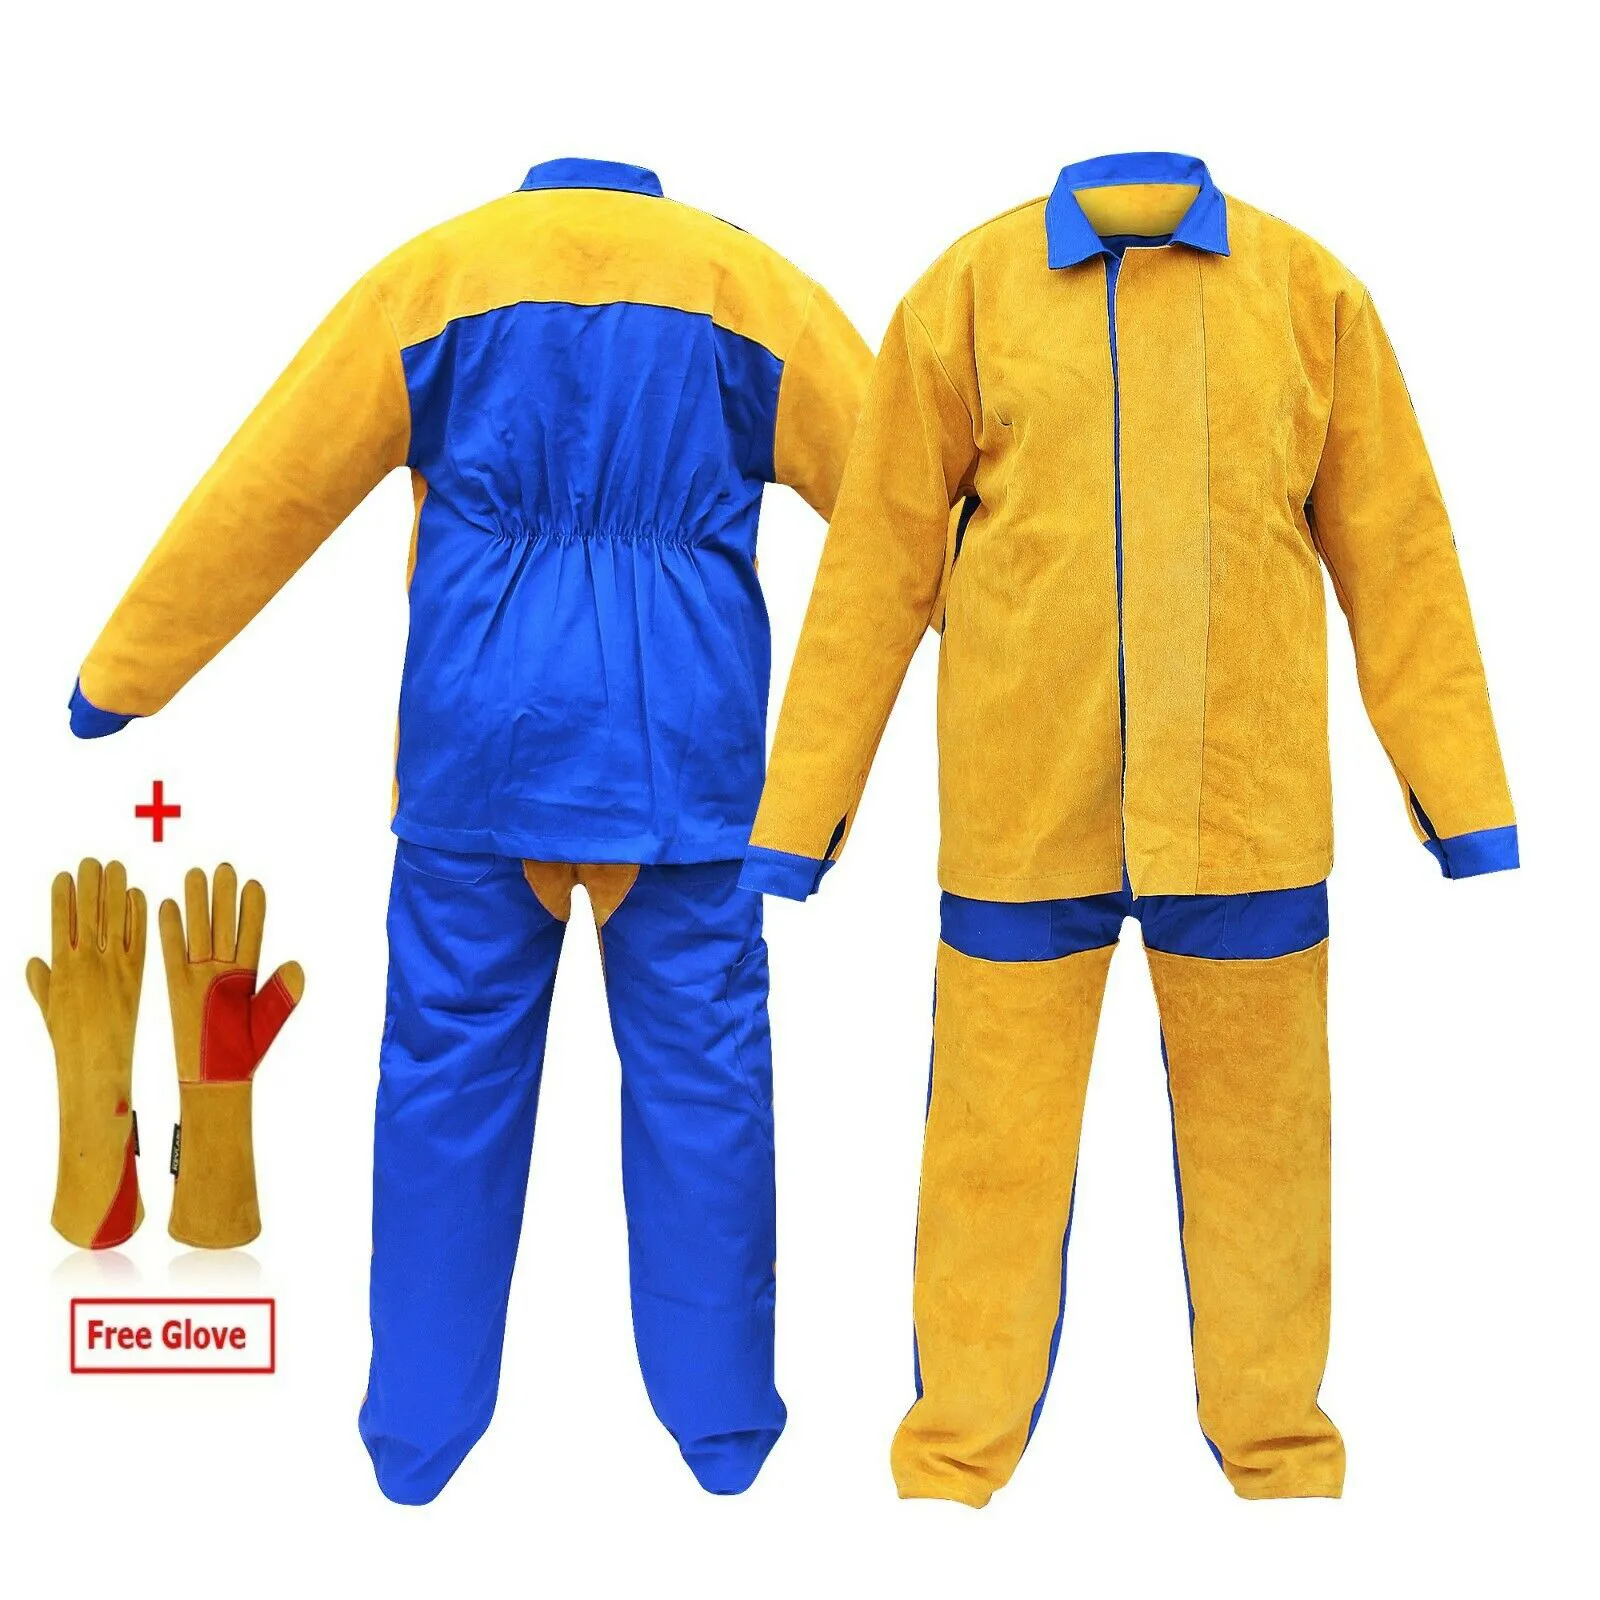 Working Leather Suit With Gloves Welding Protedctive Clothing Cow split leather welding jackets Anti Flame Bib Apron